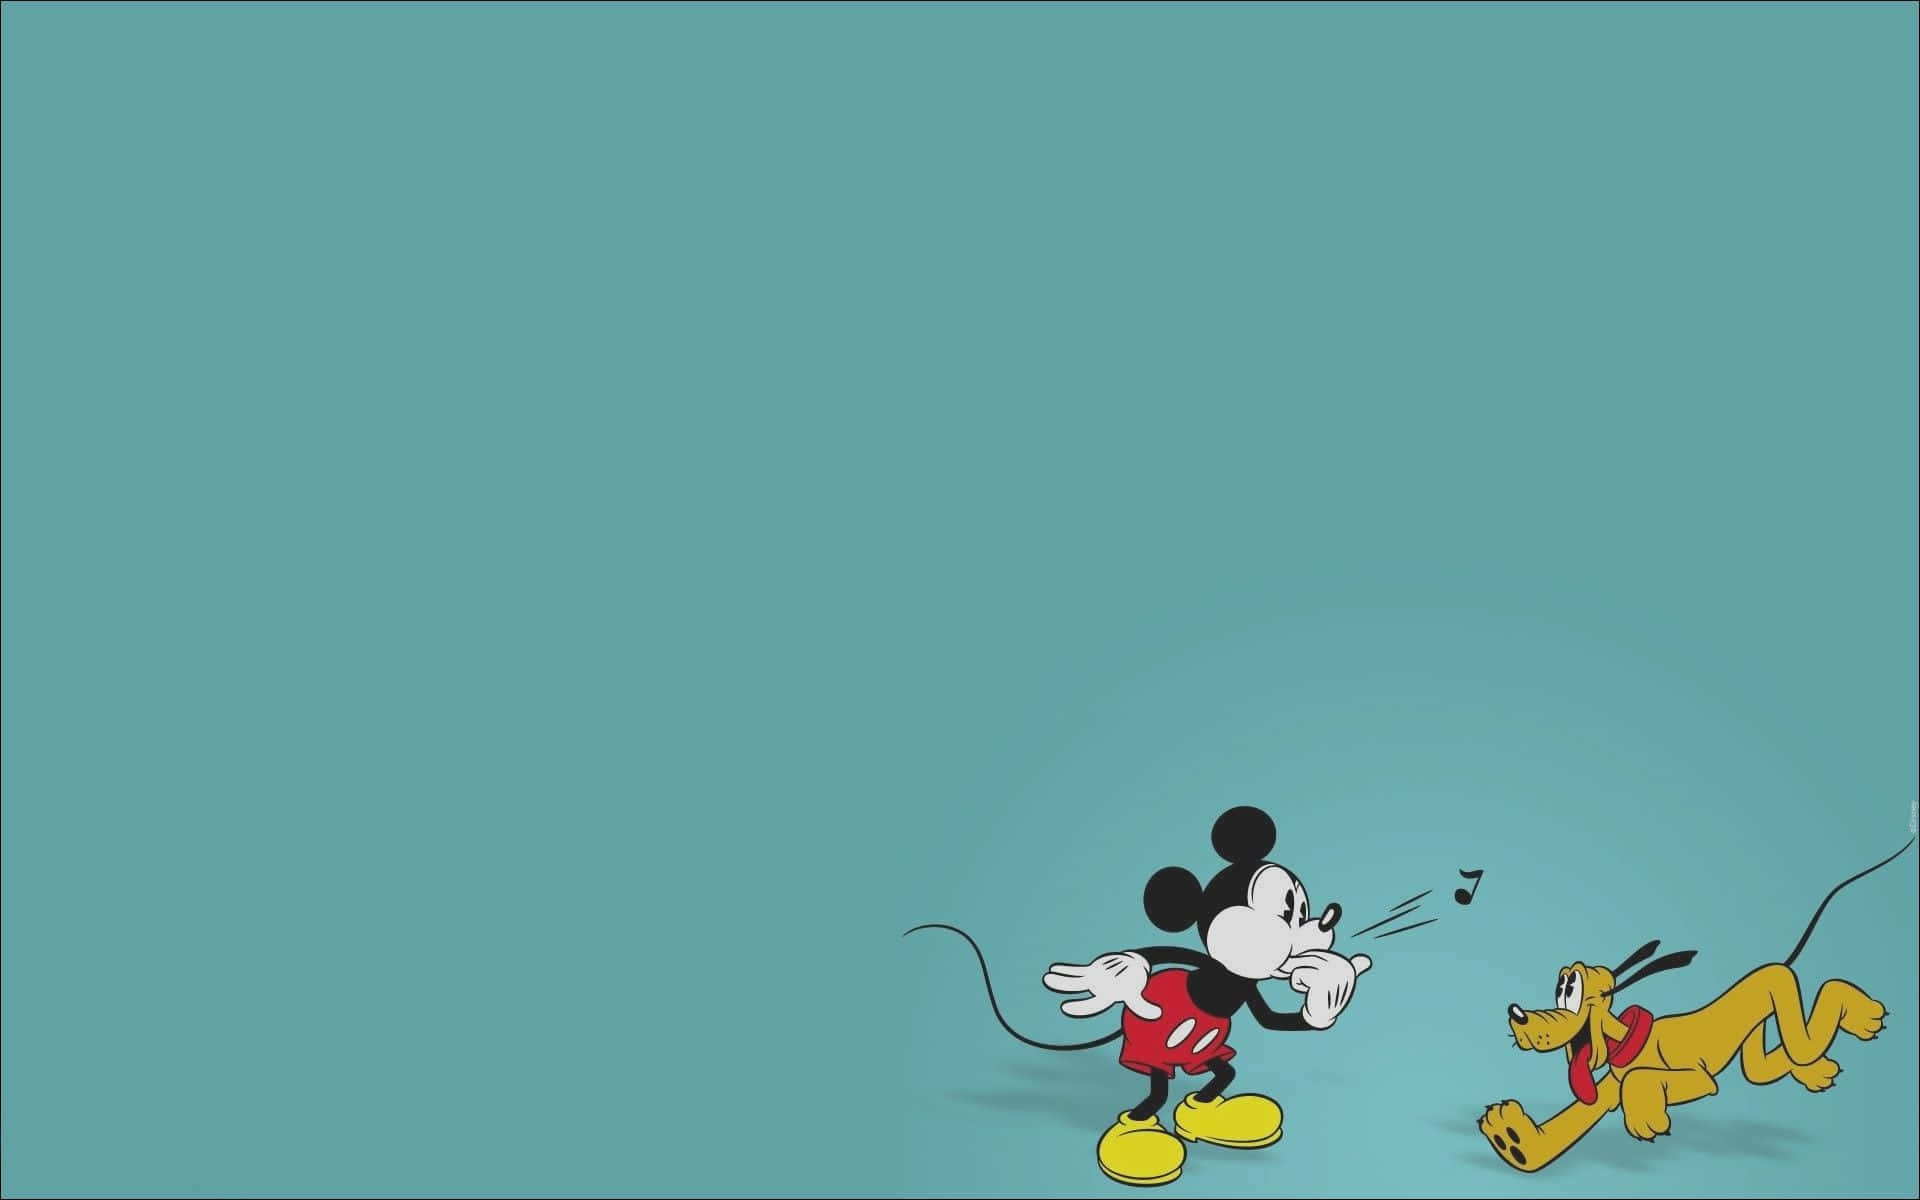 "Minnie and Mickey – An Iconic Love Story" Wallpaper